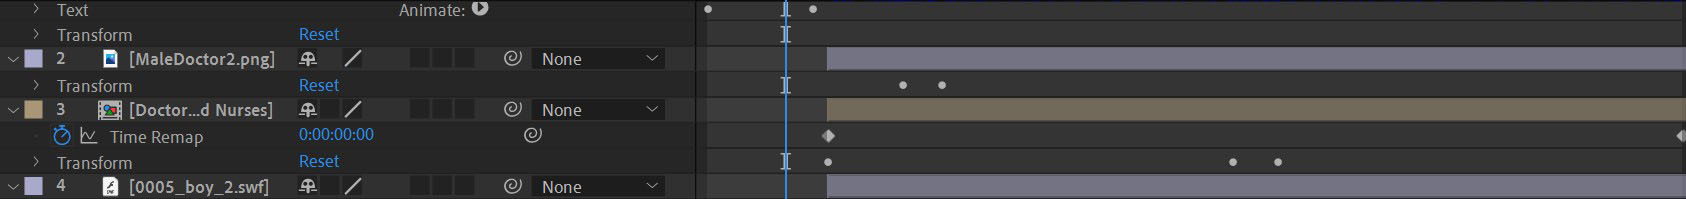 After Effects Timeline